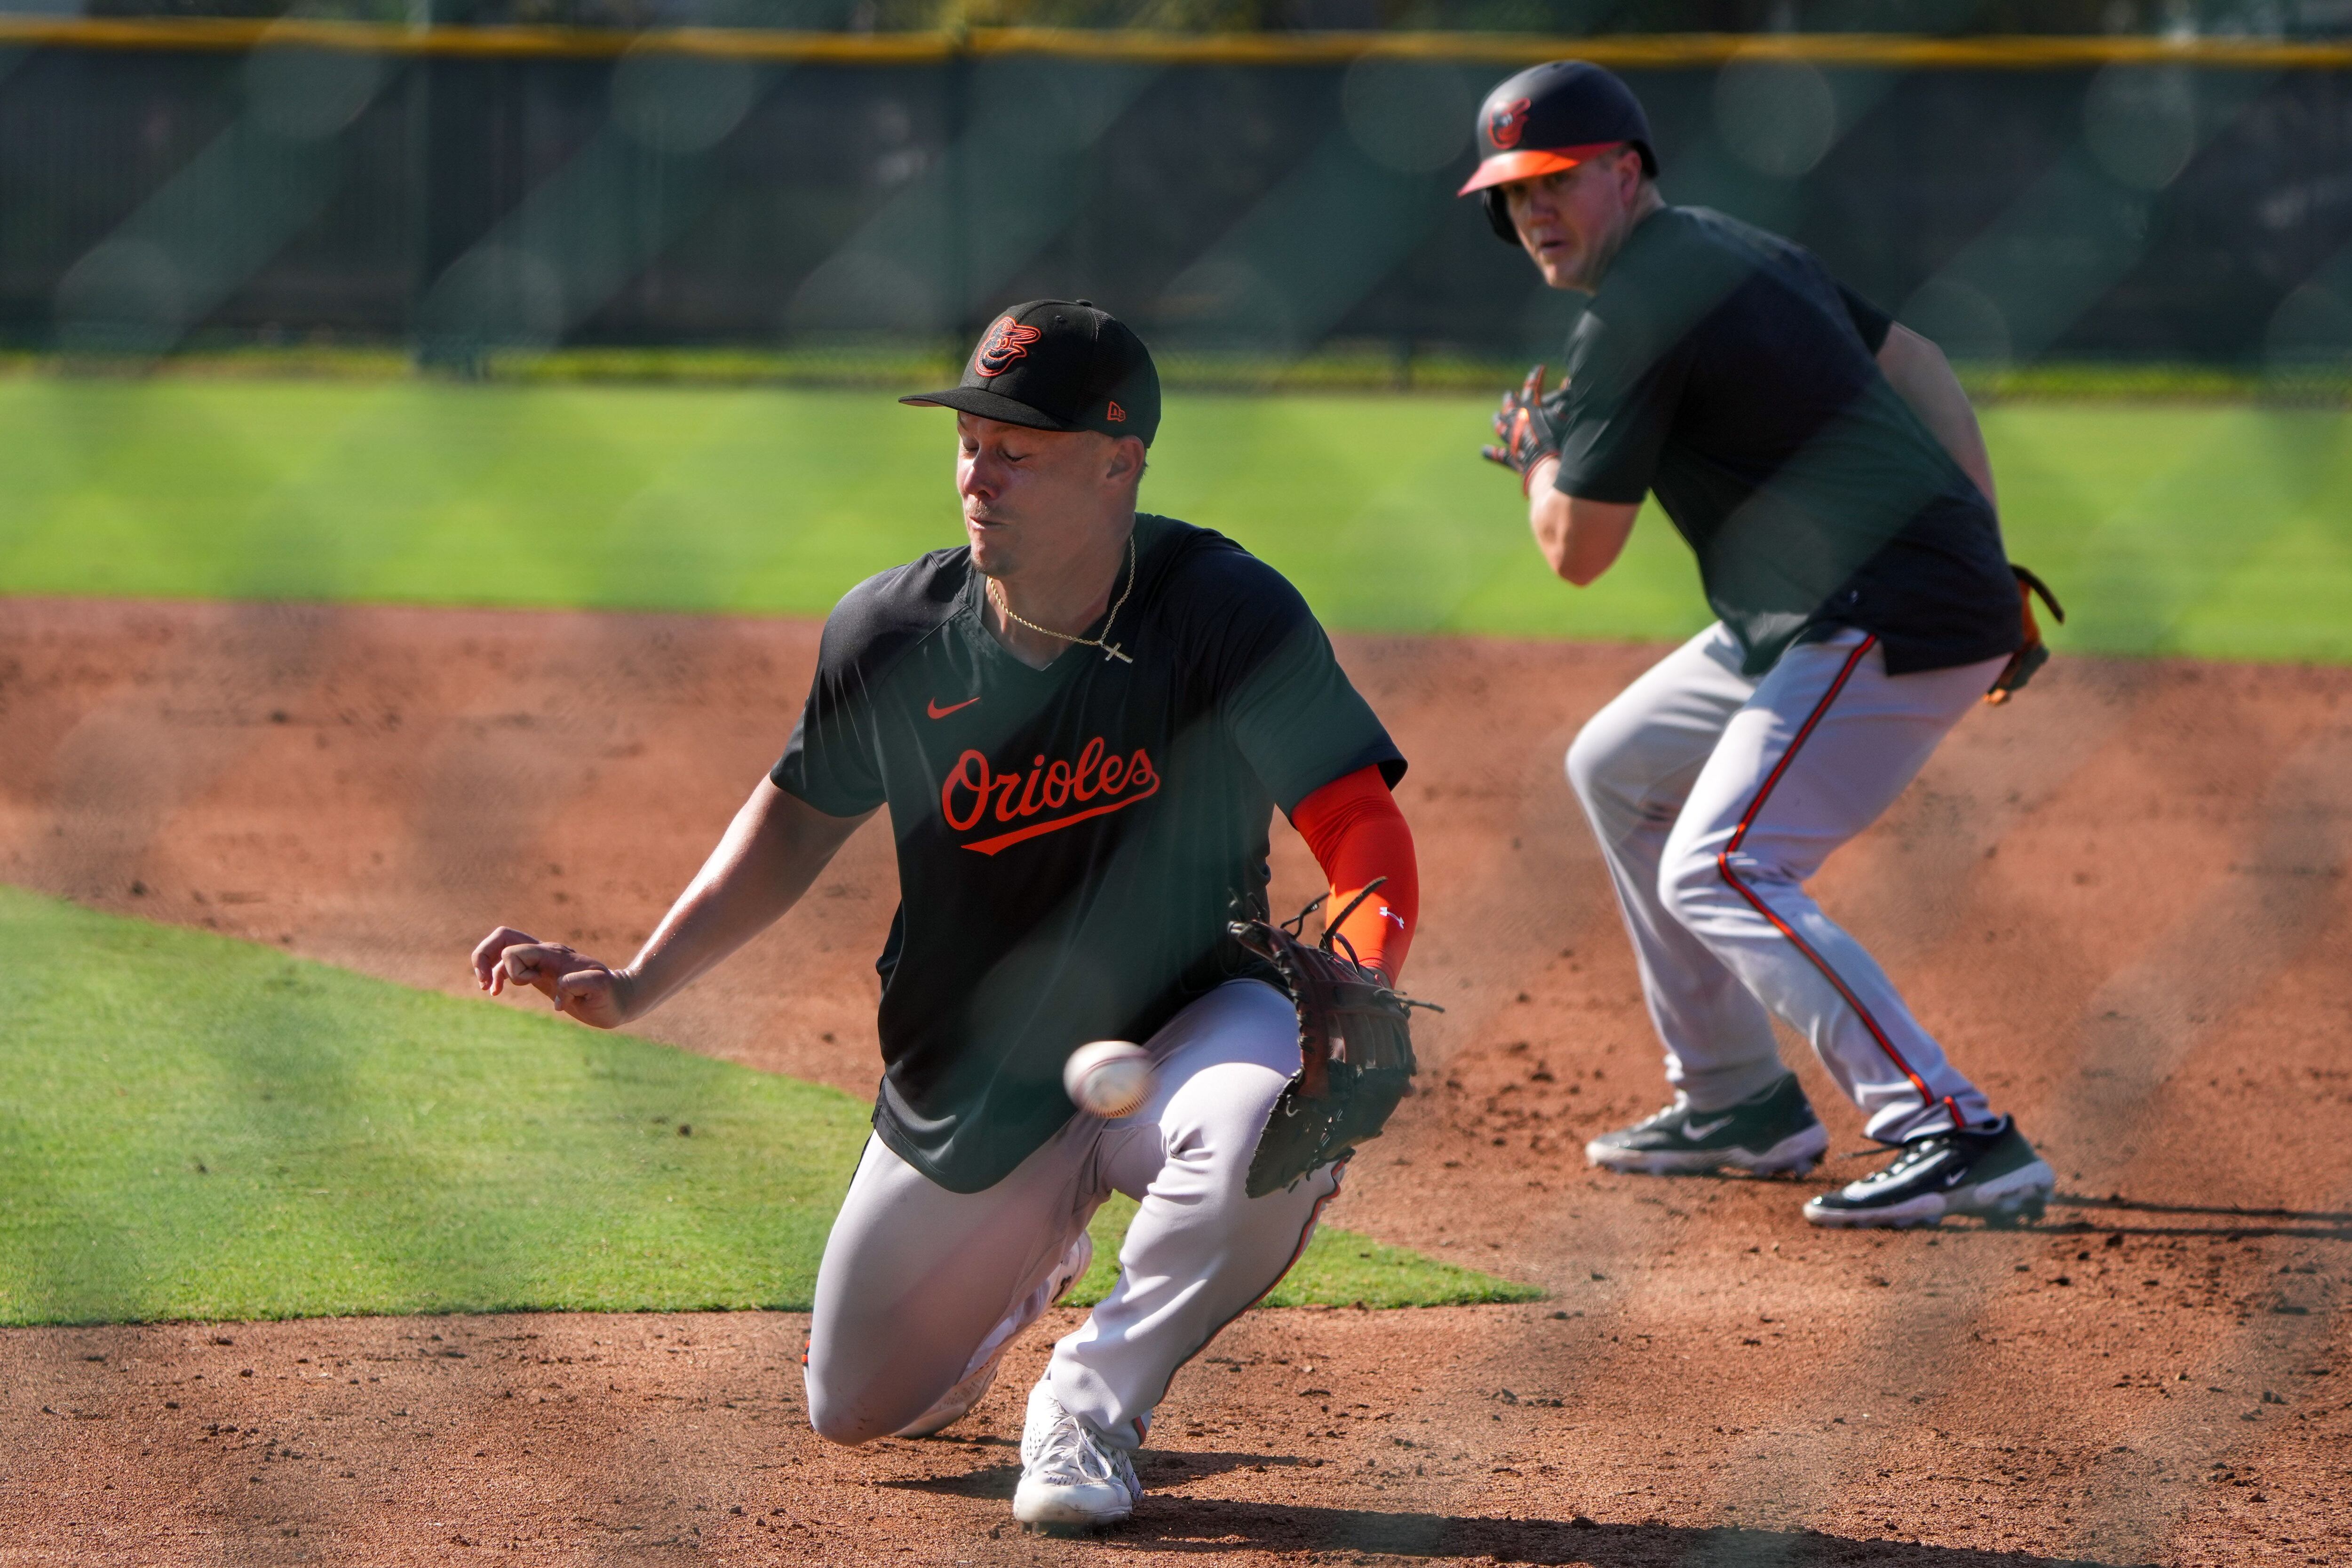 Orioles: Spring Training Questions To Ponder - Baltimore Sports and Life